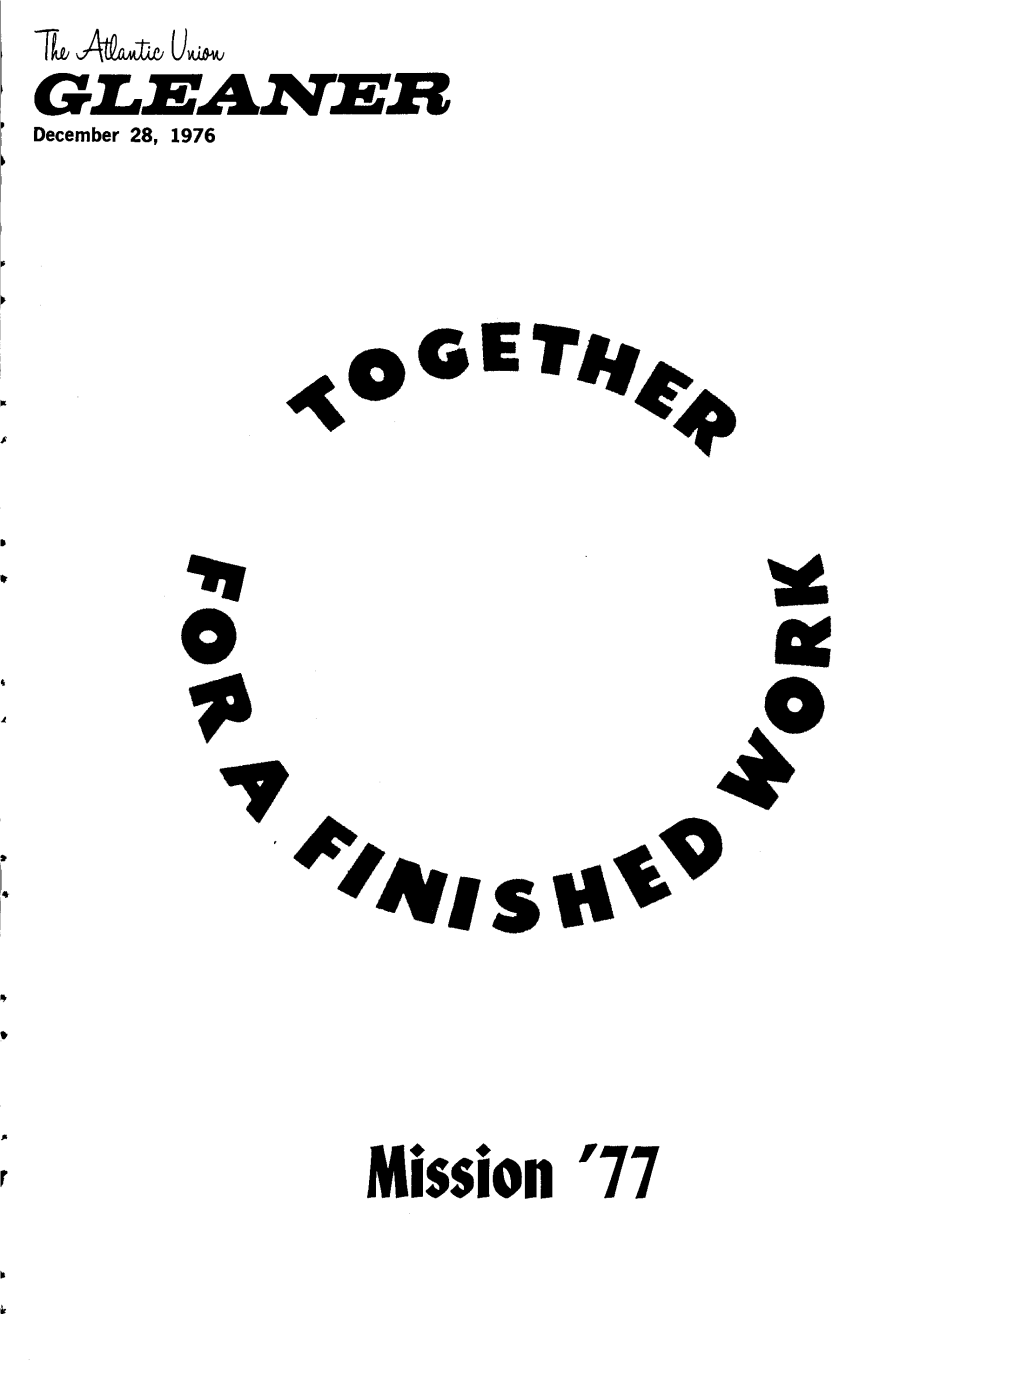 Mission '77 Finishing the Work Together